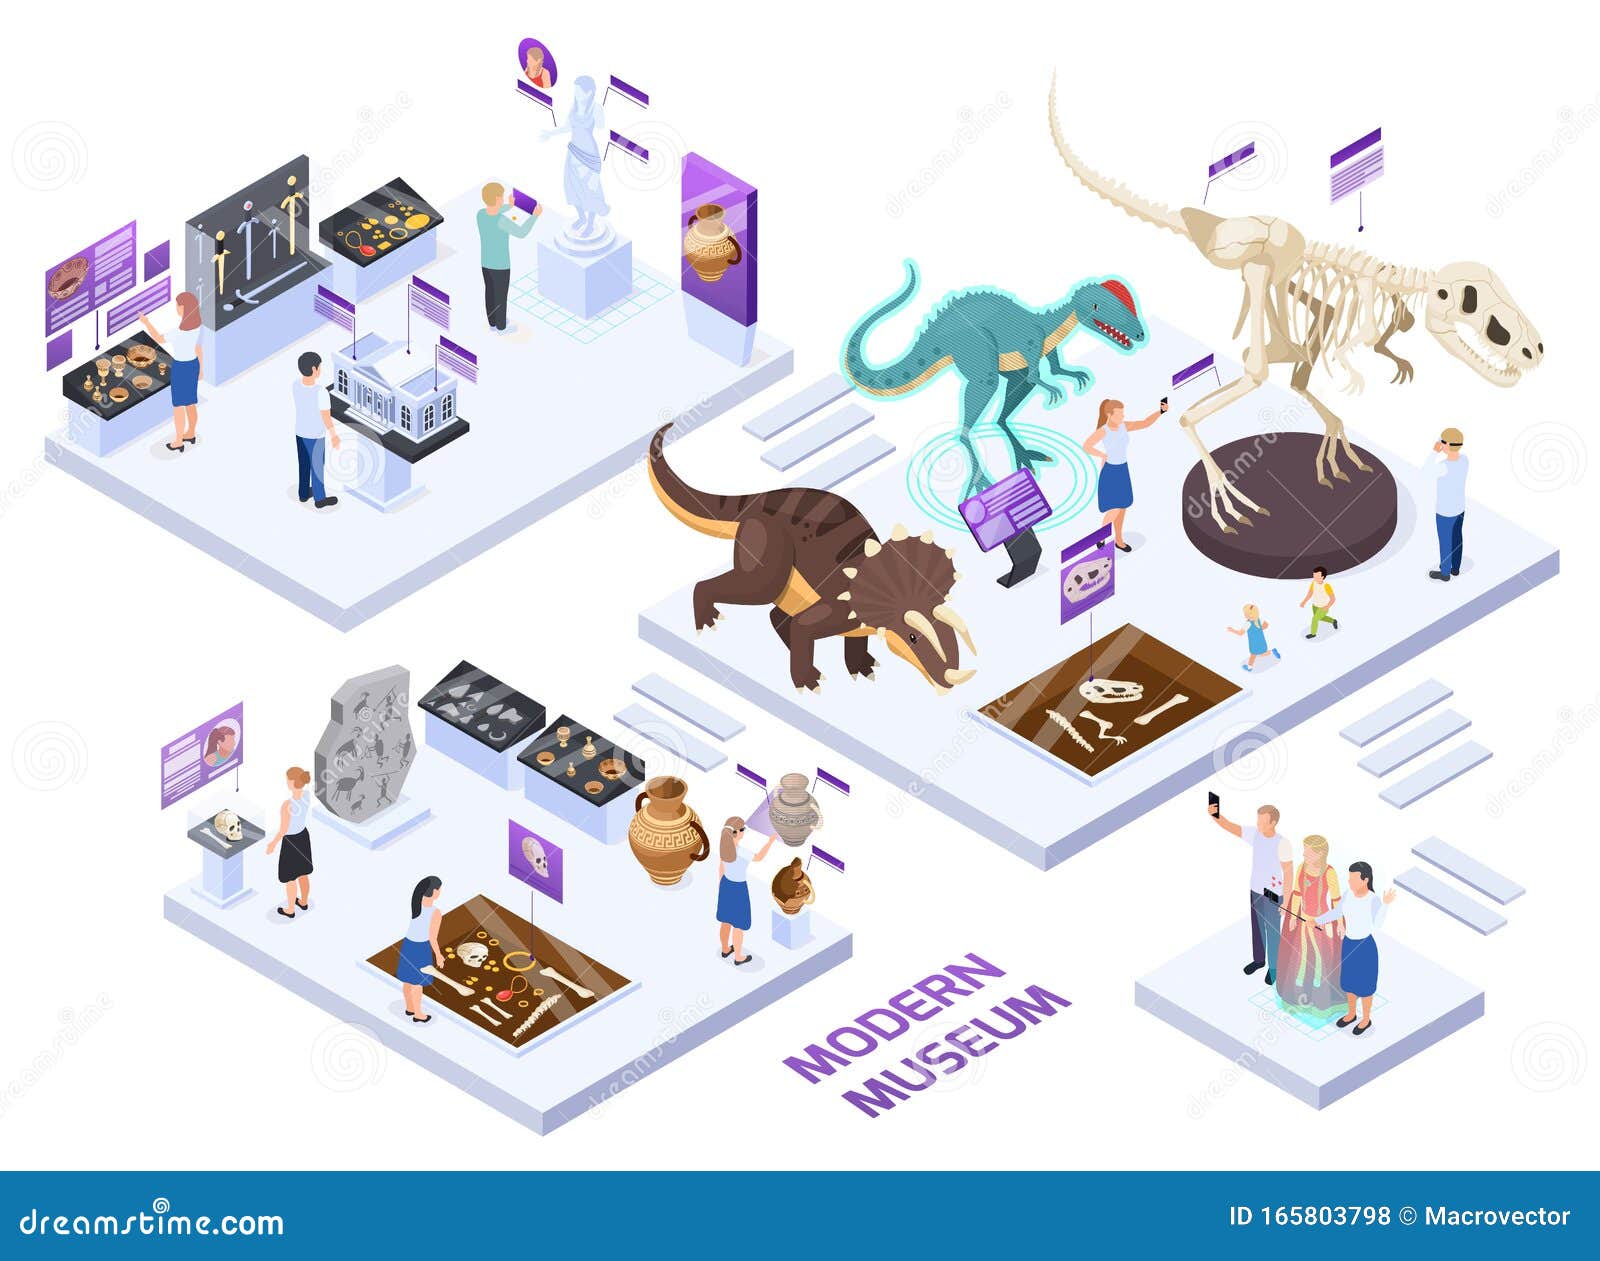 modern museum isometric concept